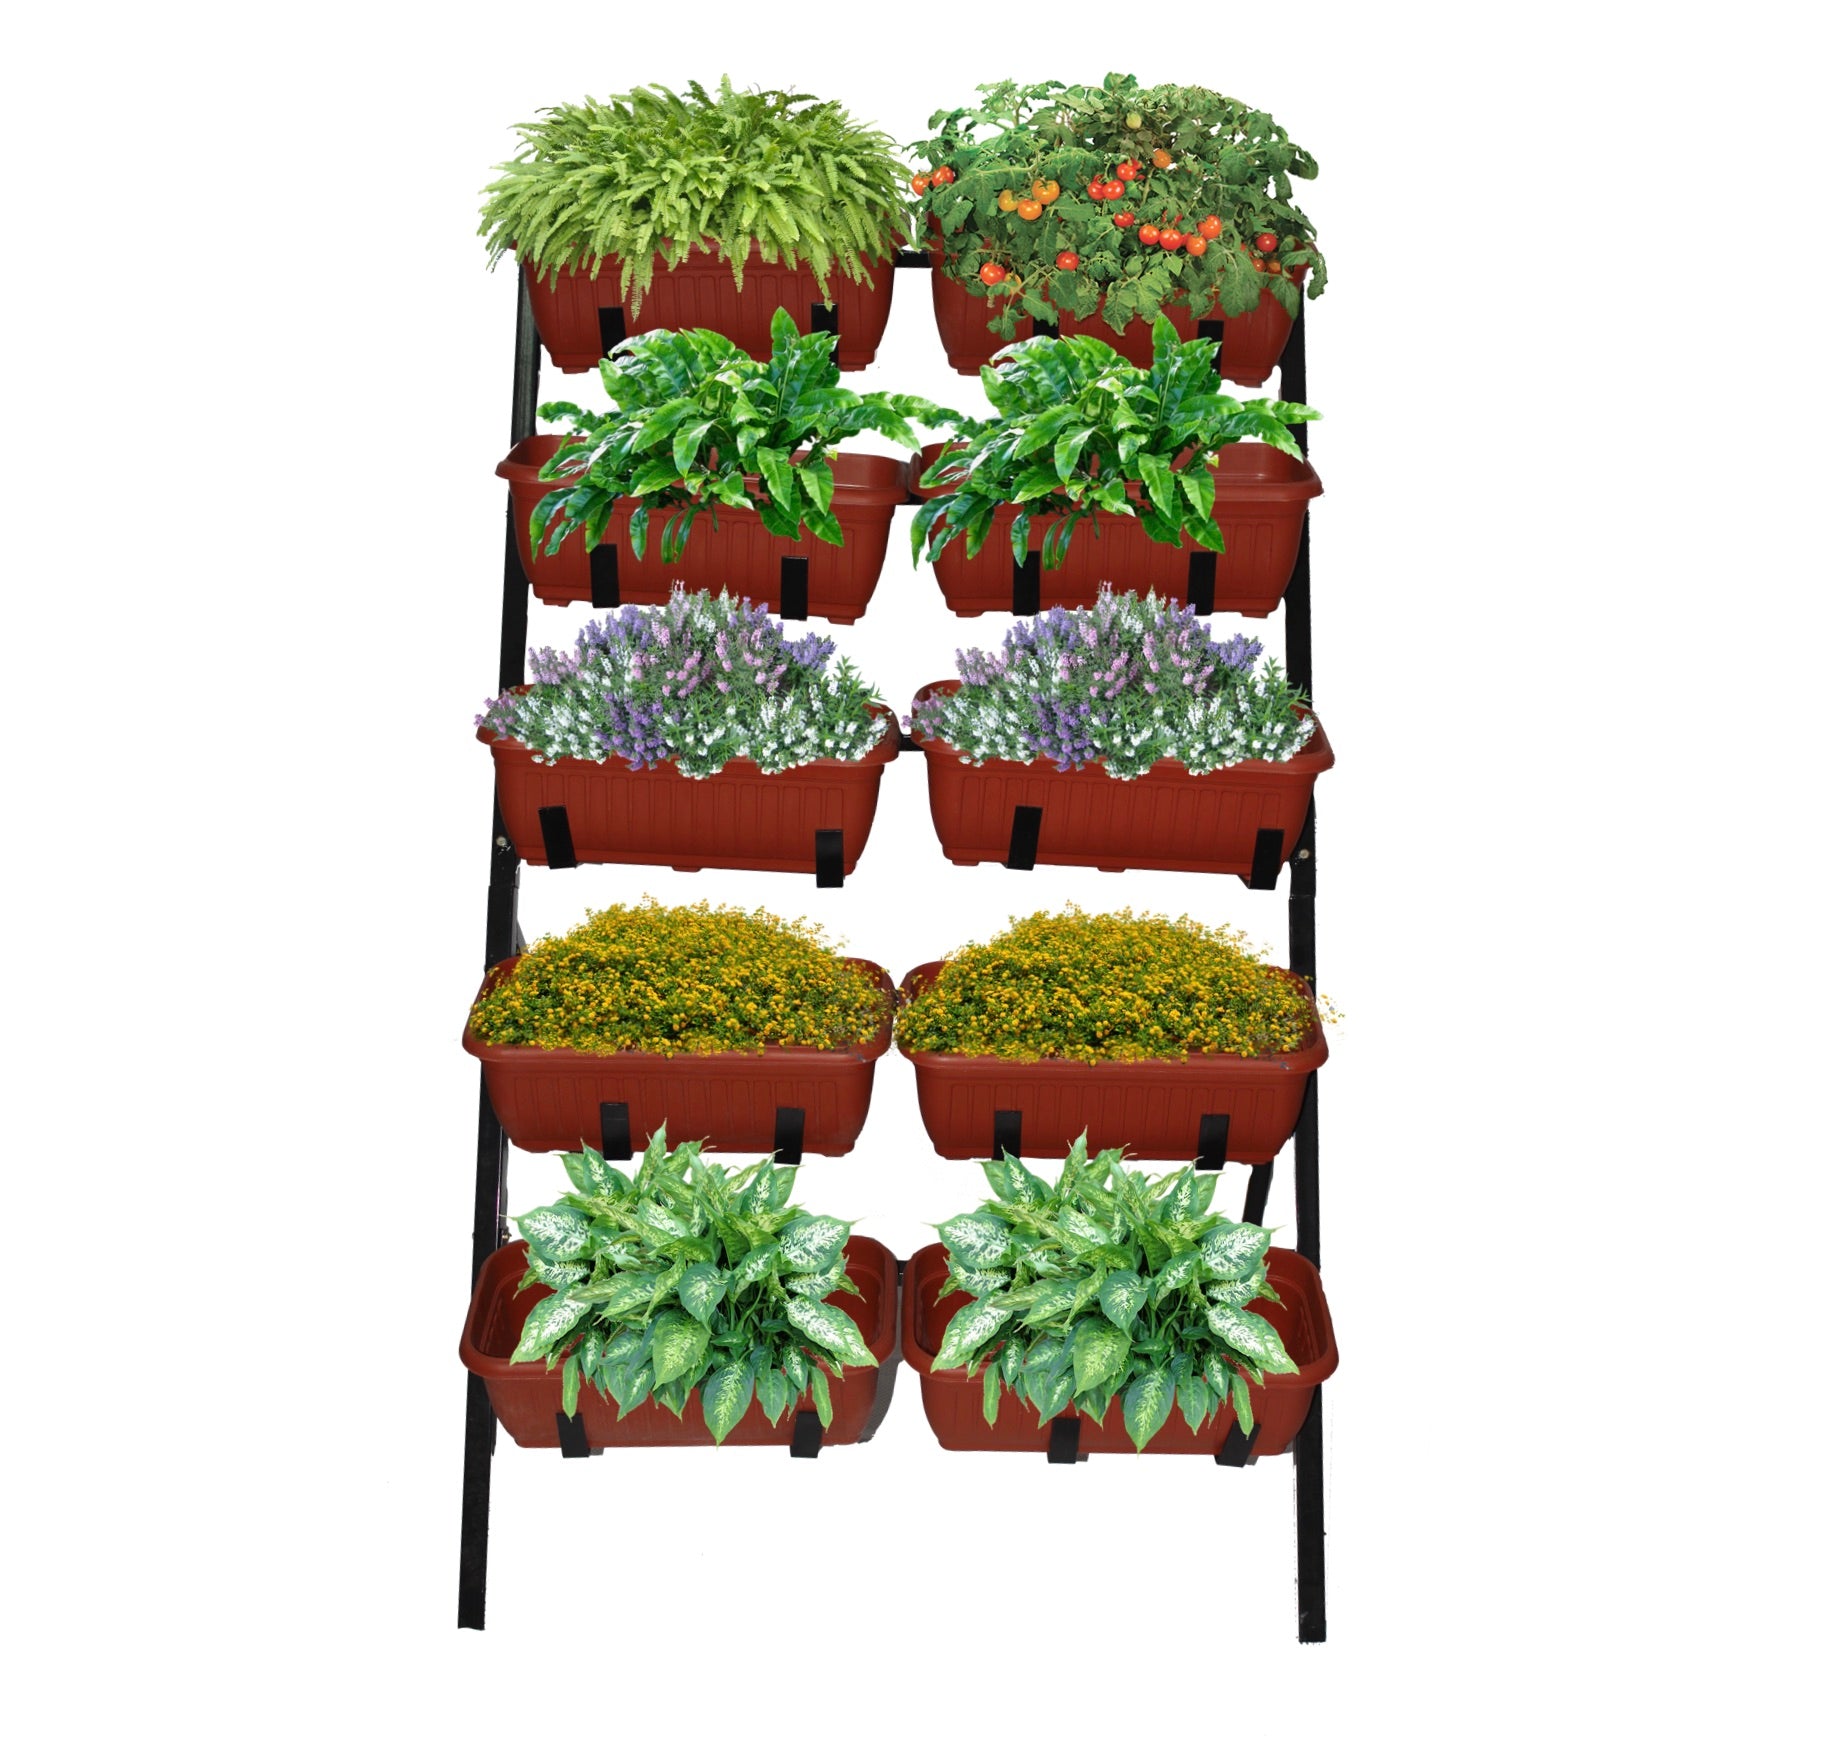 Harvest Metal Plant Stand with 10 Baskets for Balcony and Terrace Gardening